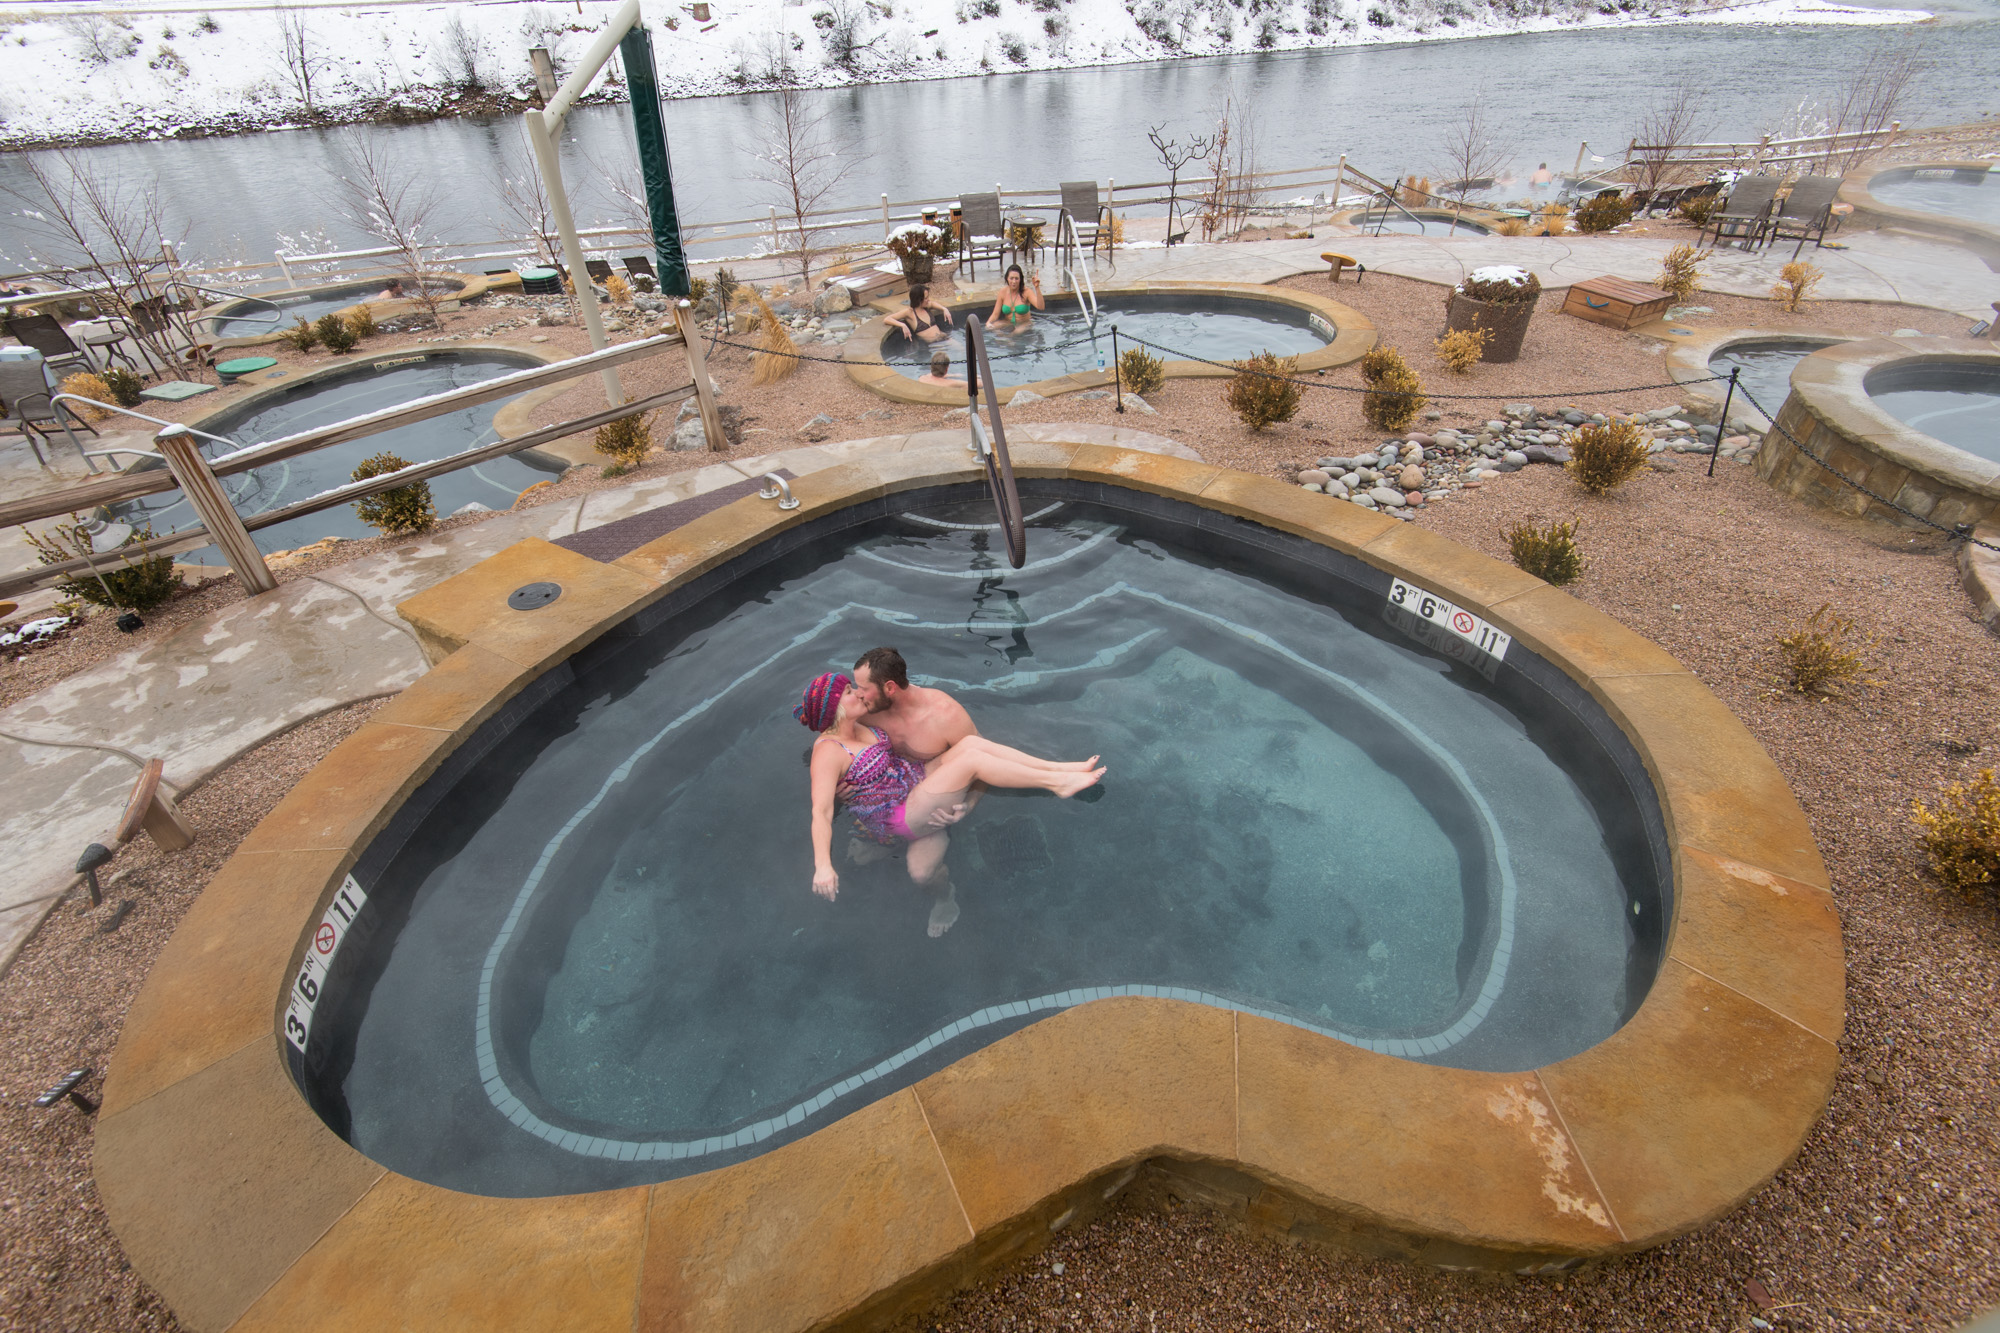 couple in heart shaped pool during winter time at iron mountain hot springs